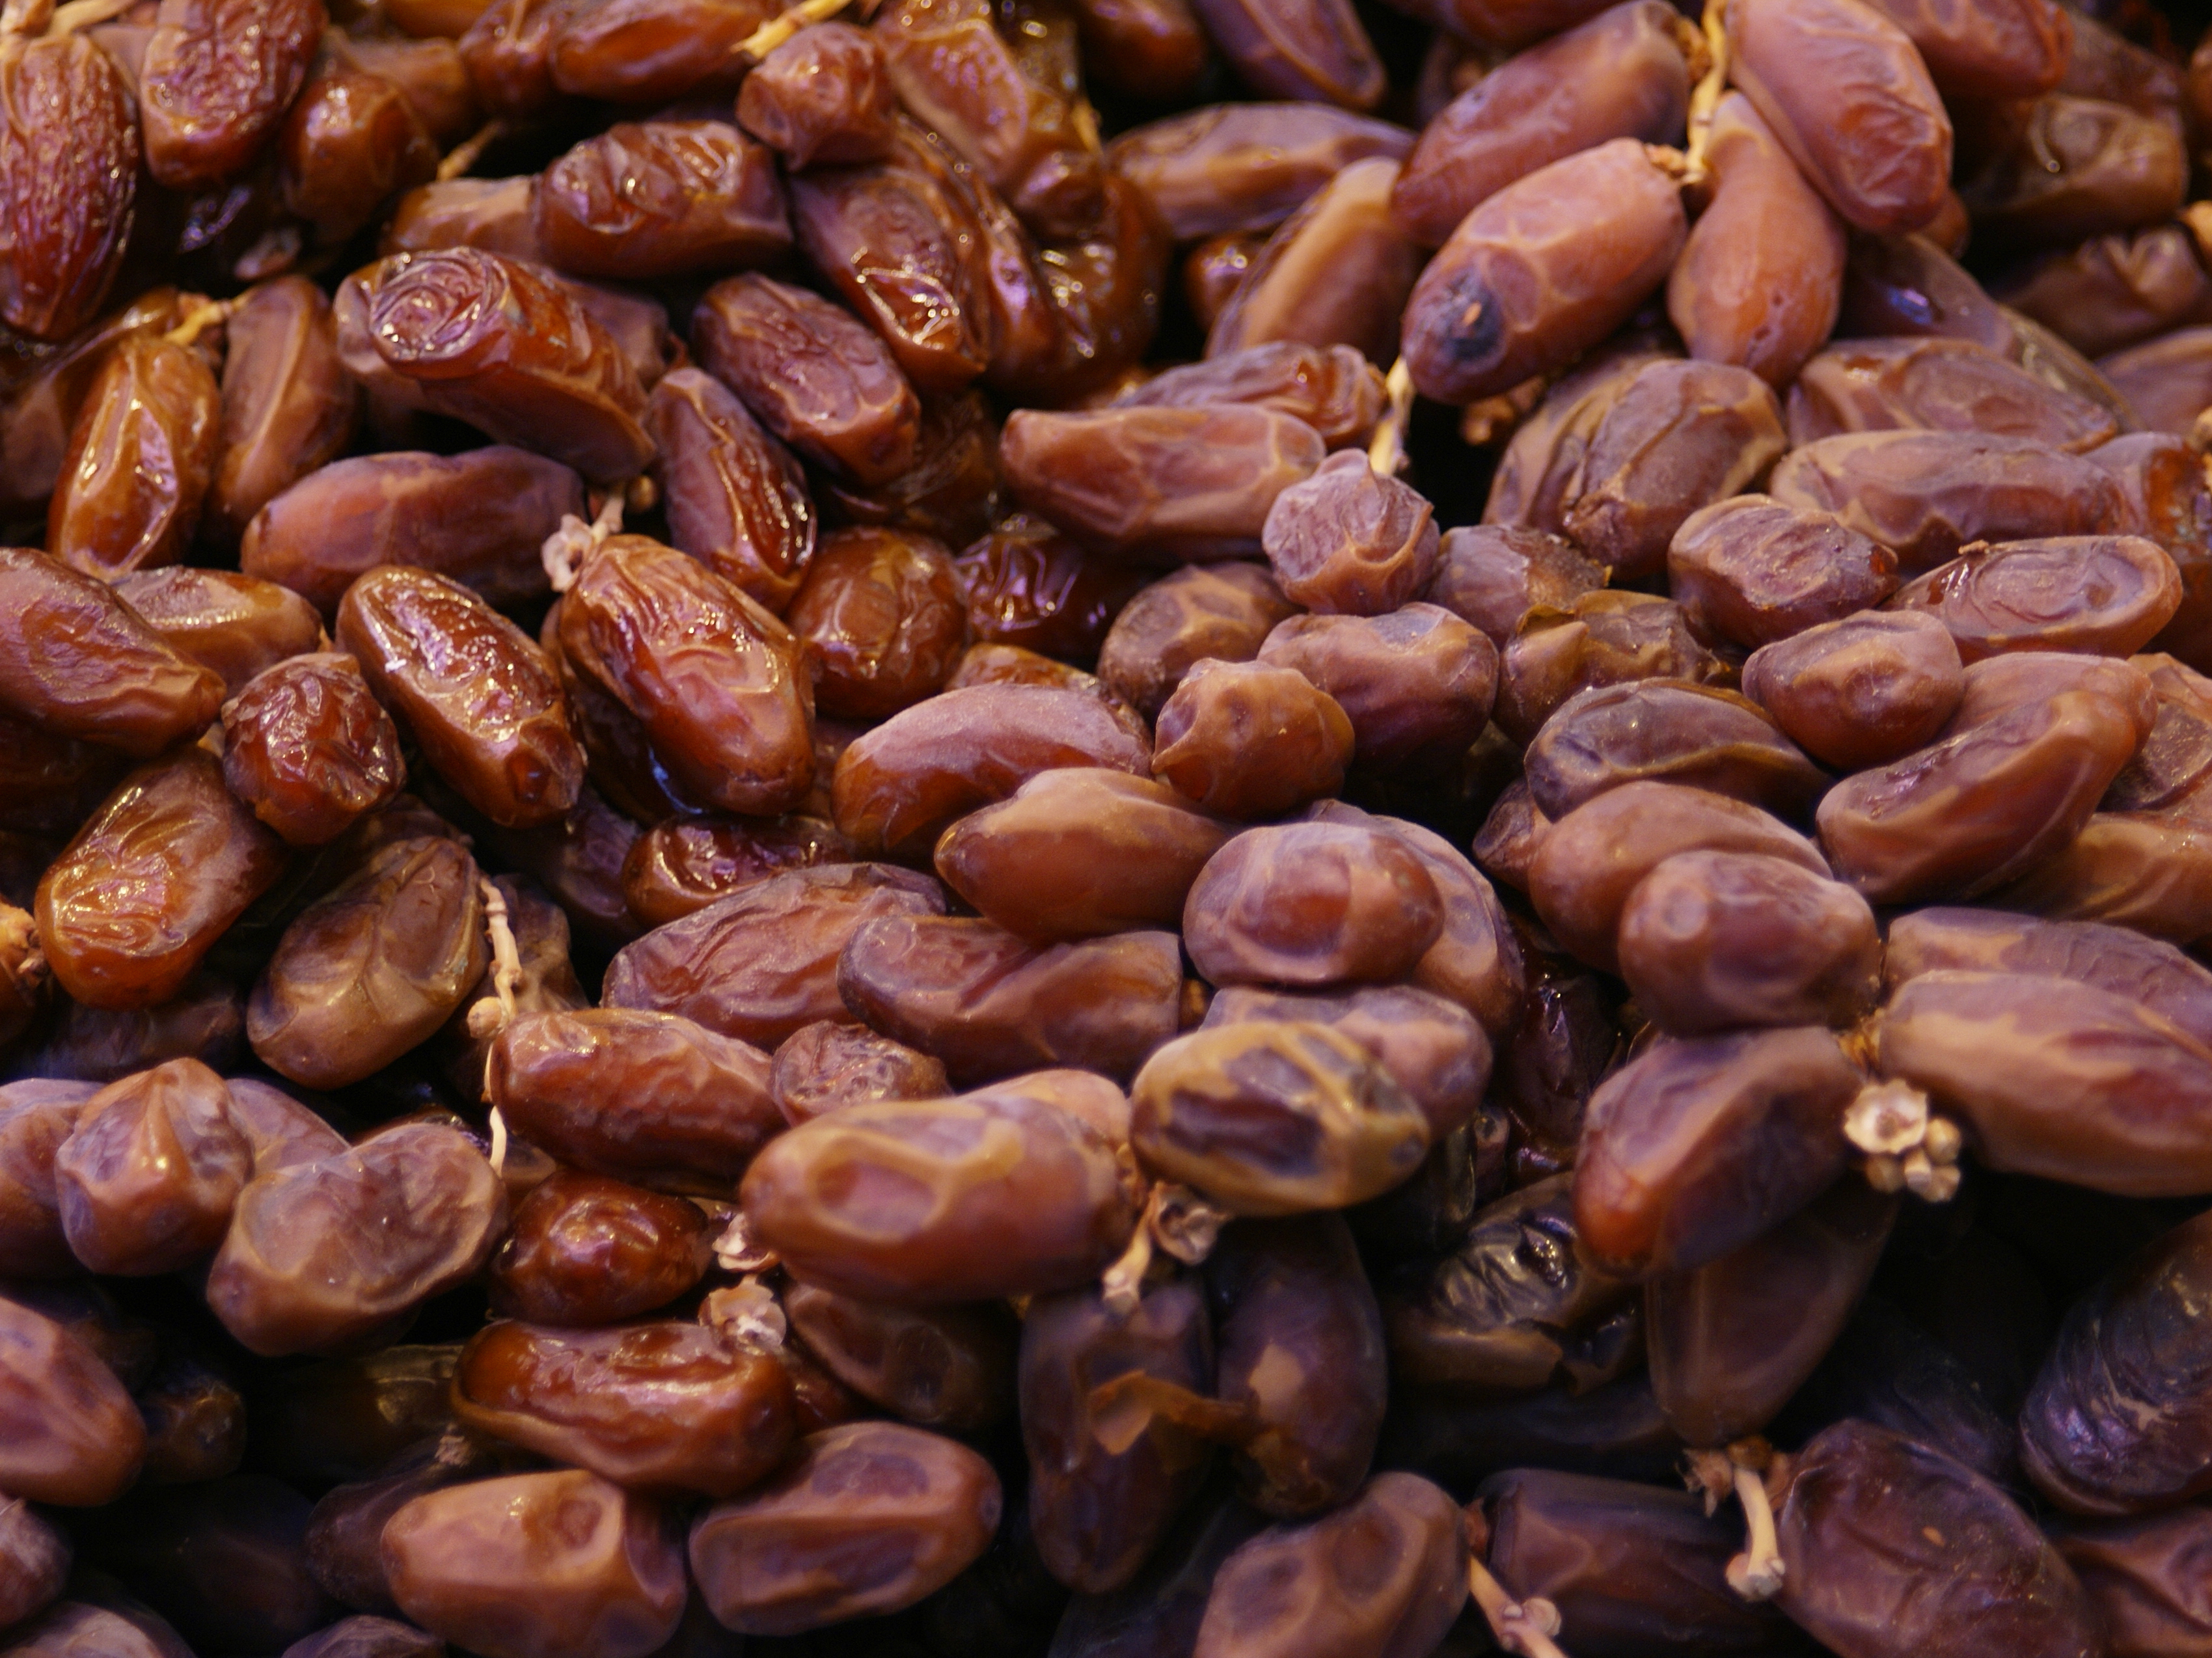 A pile of dates